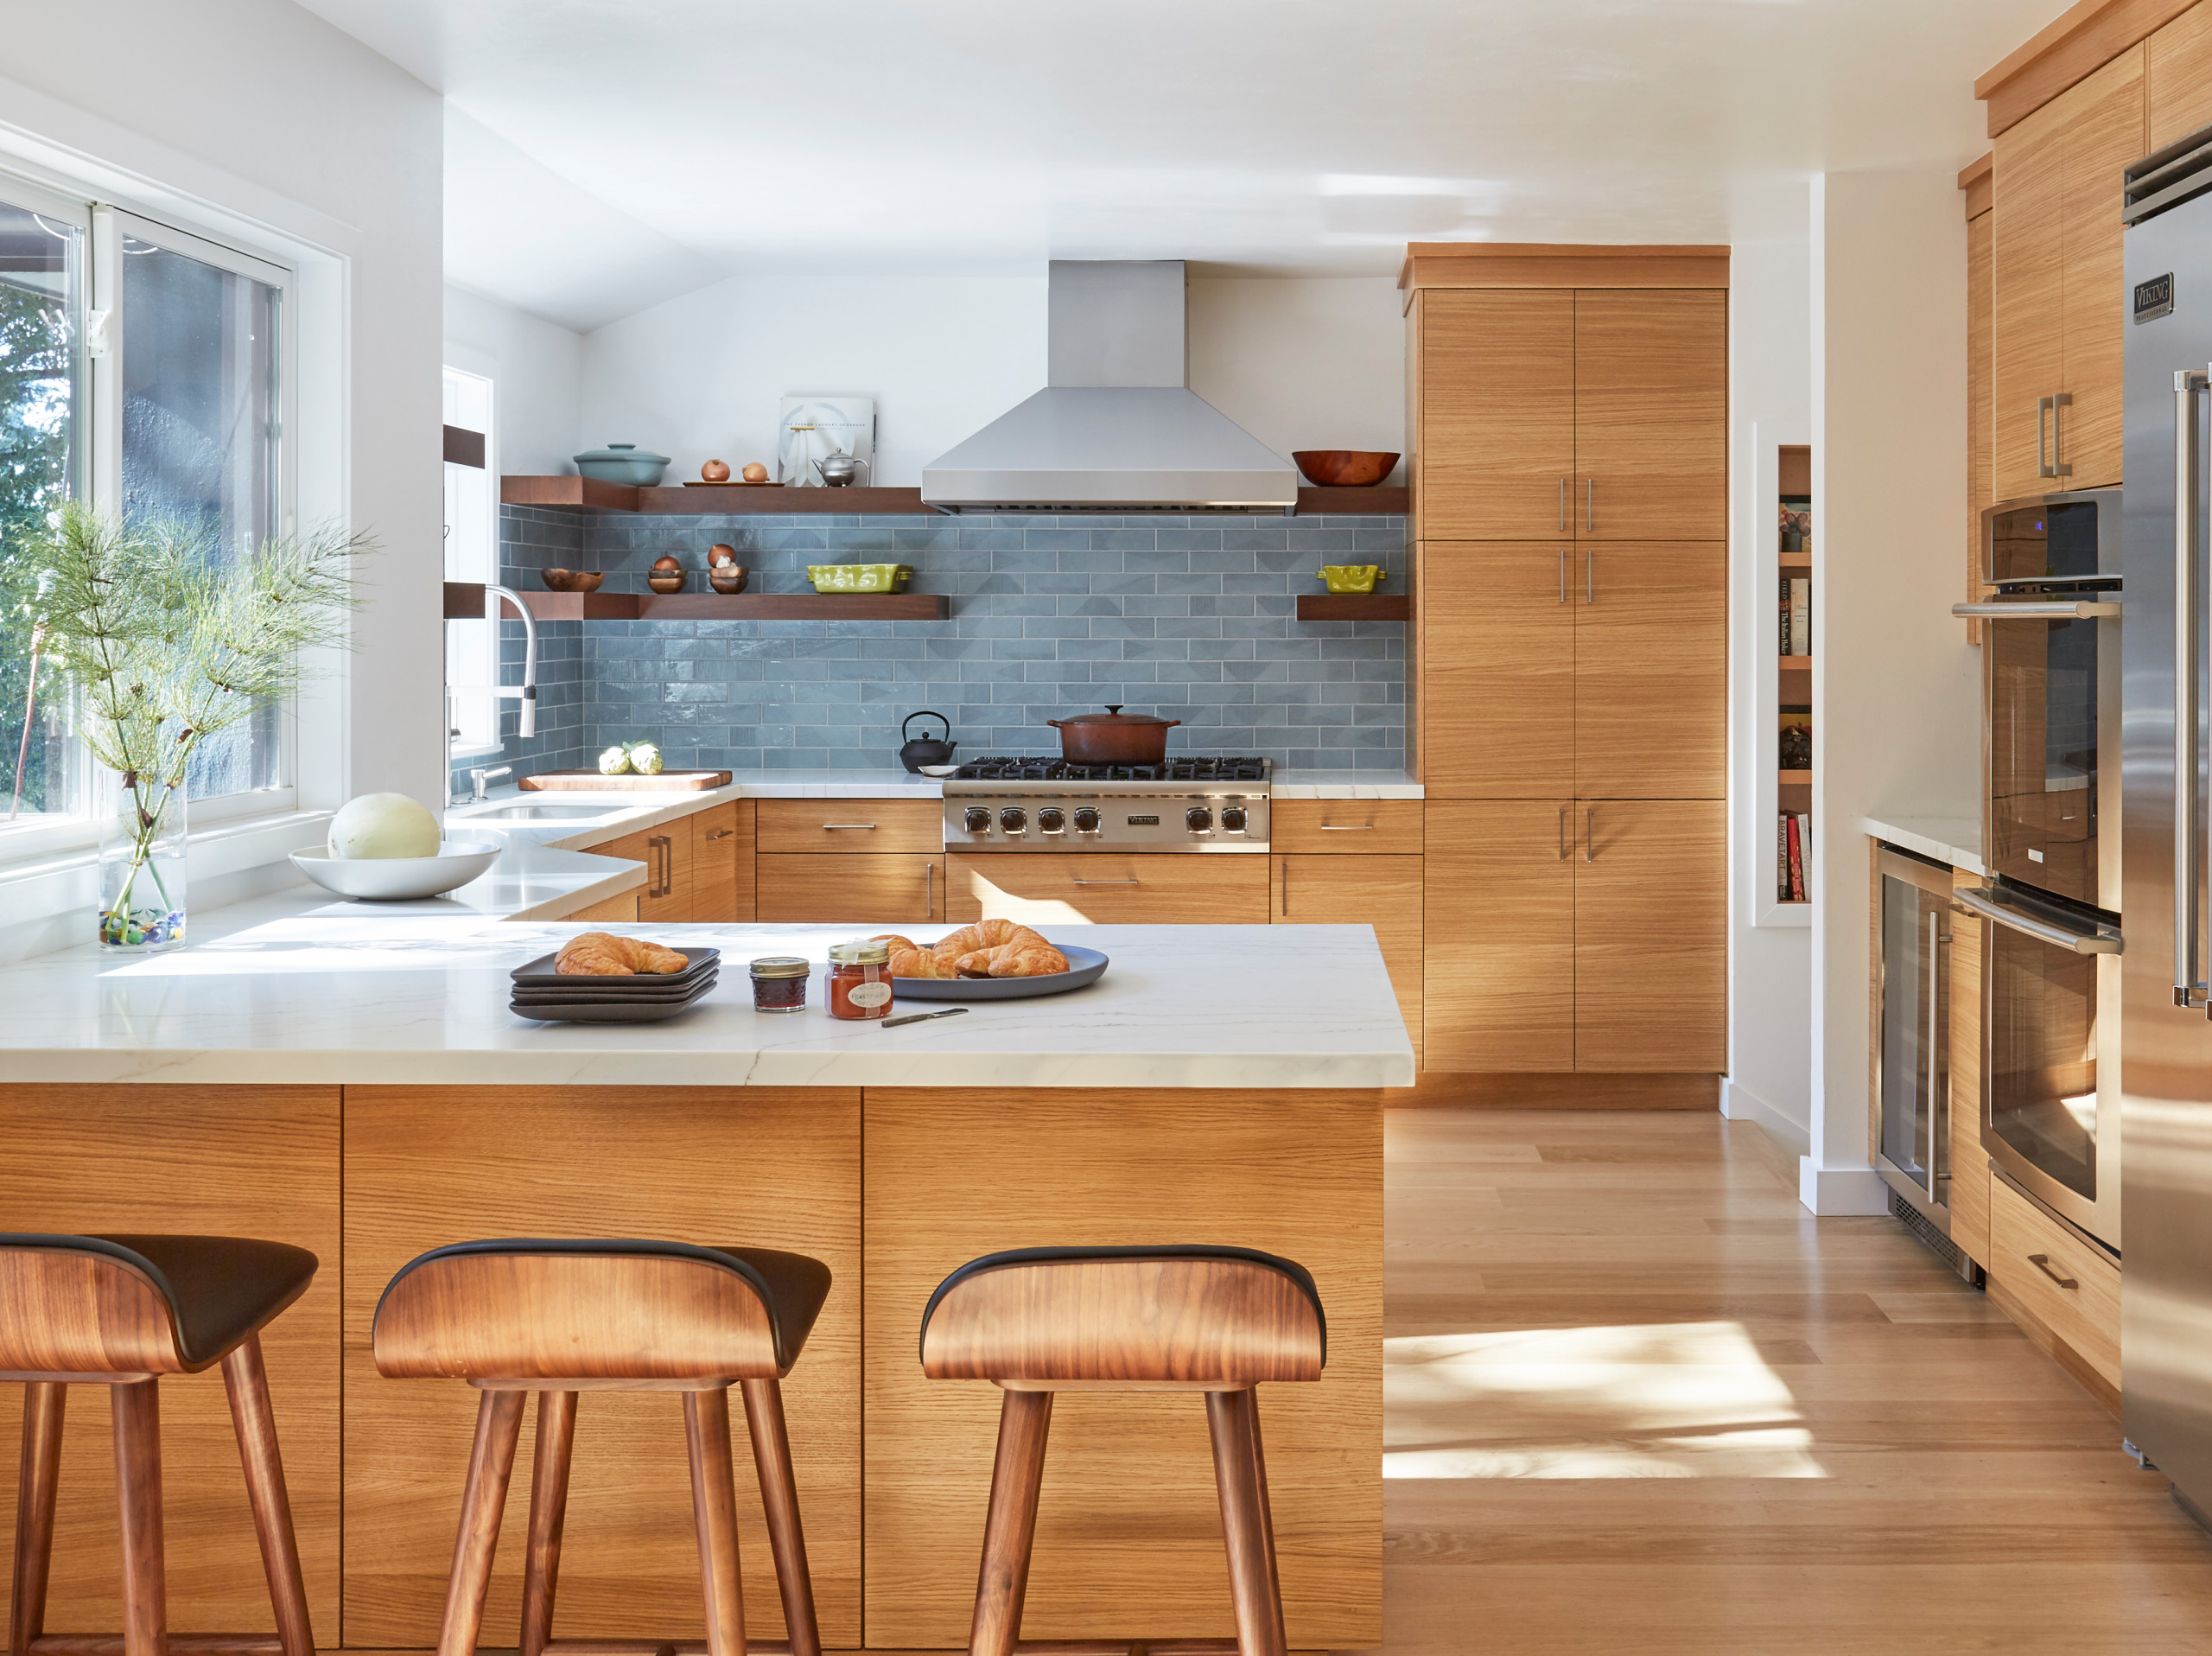 20 Beautiful Contemporary Kitchen Pictures & Ideas   Houzz